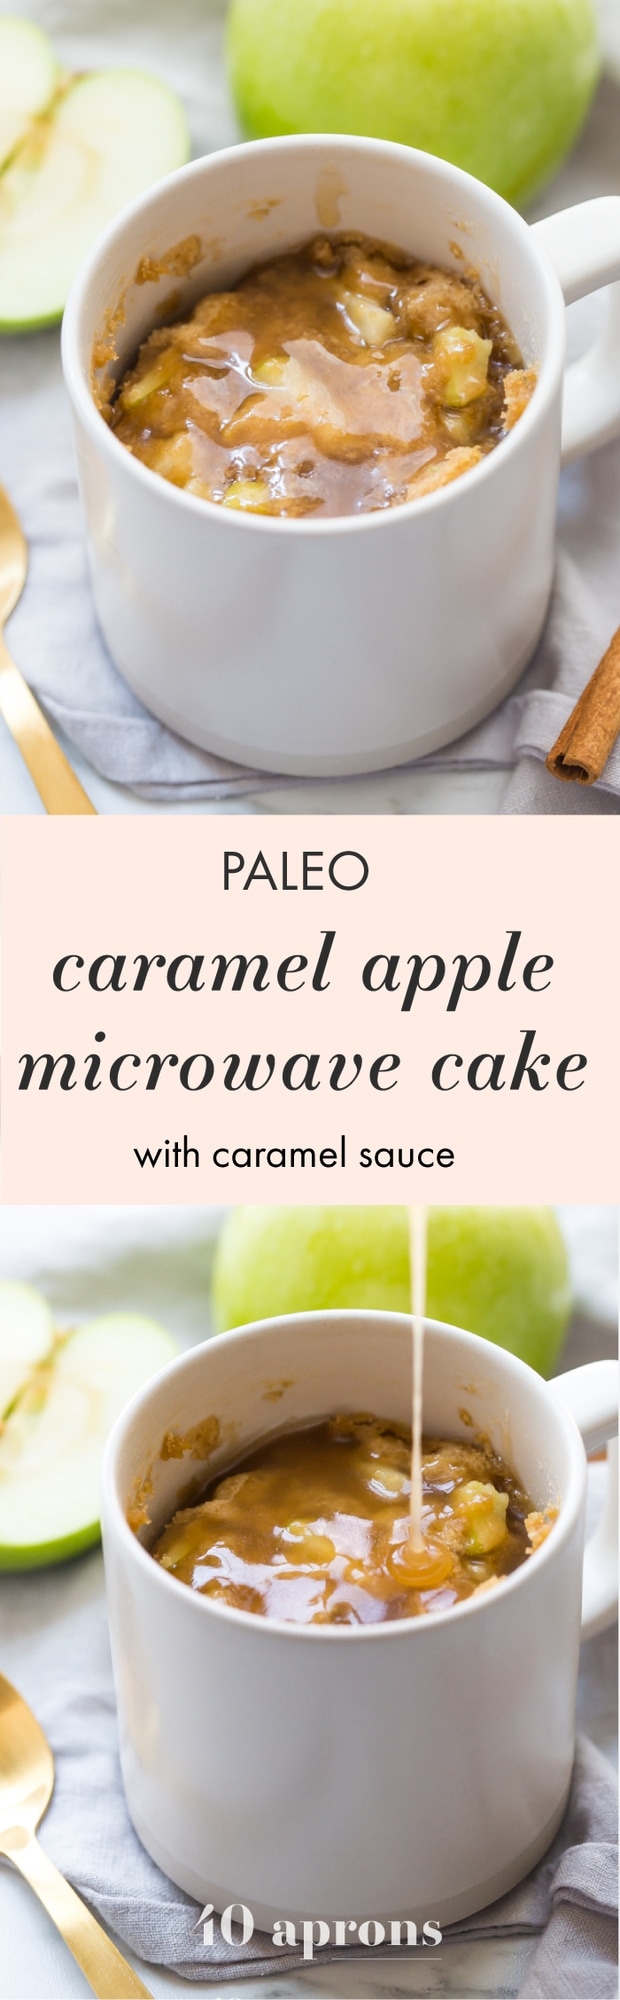 This paleo caramel apple microwave cake is indescribably good, with a moist cinnamon-spiced cake, tender green apples, and a 2-minute caramel sauce to top it all. I bet you'll make this paleo caramel apple microwave cake all the time, since it only take a few minutes to stir together and two minutes in the microwave to cook! This paleo caramel apple microwave cake is the perfect paleo microwave dessert. I'm obsessed!